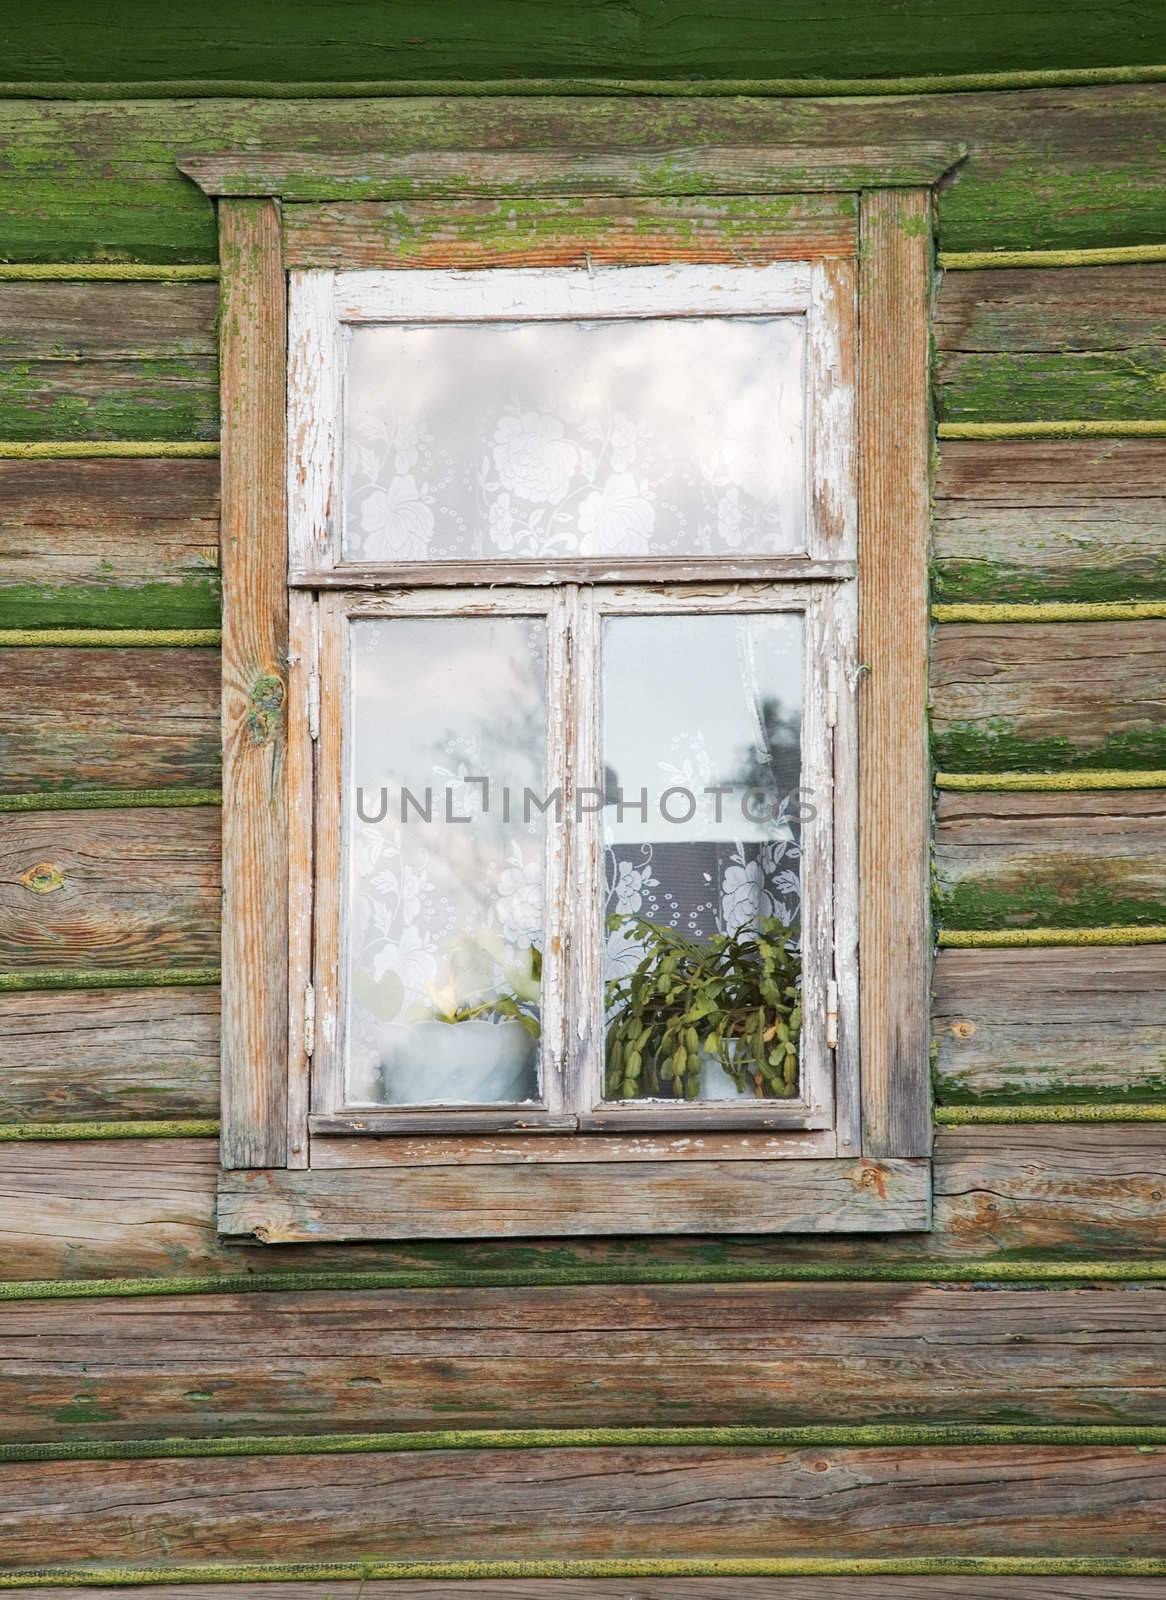 The window of old wooden rural house